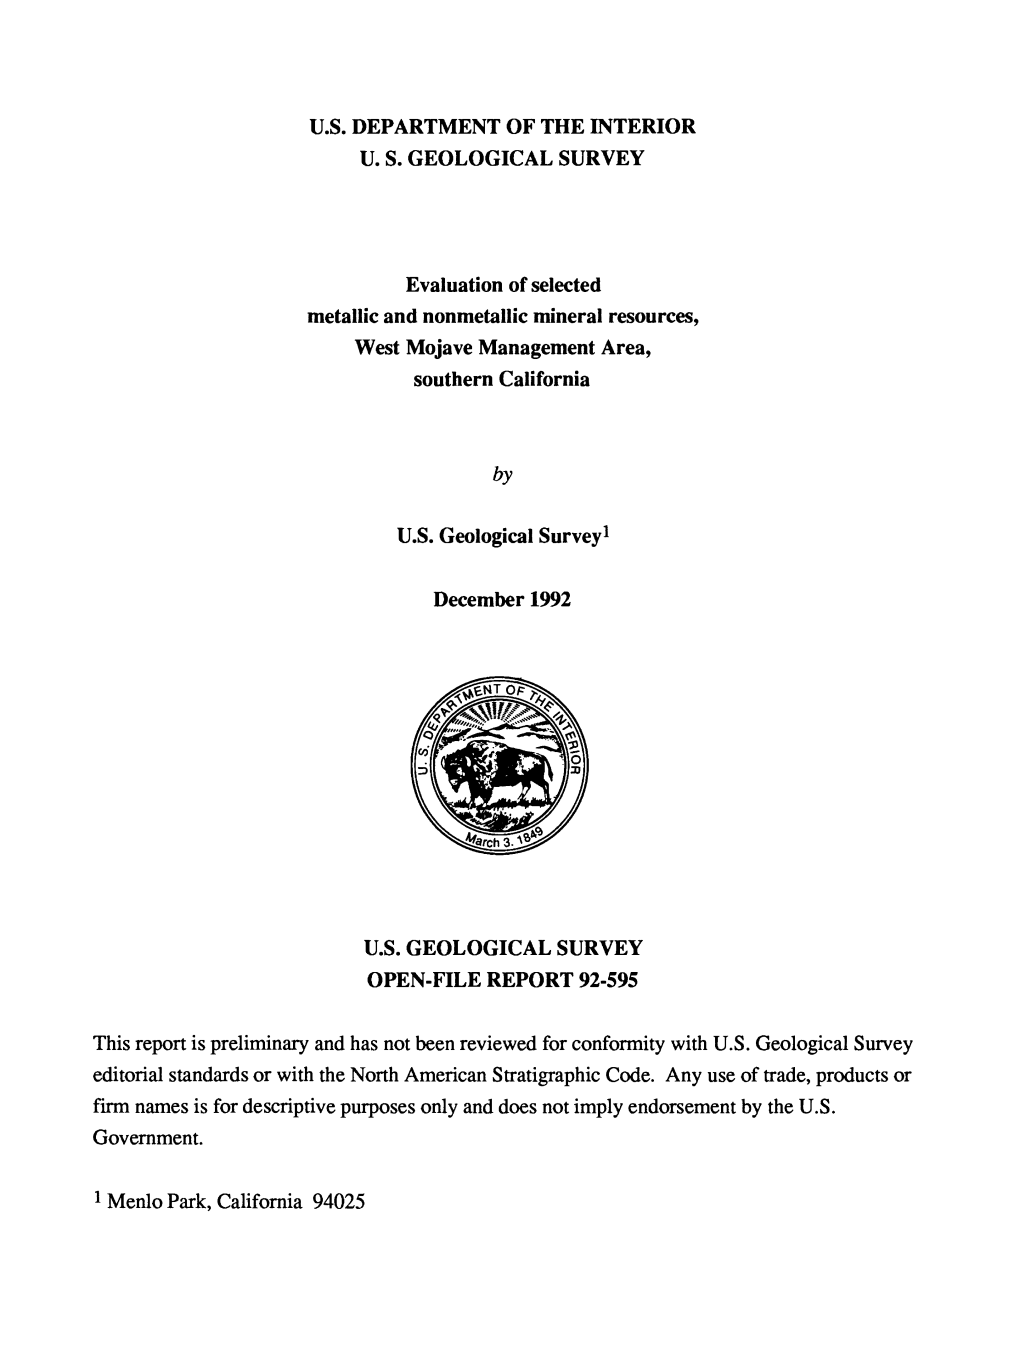 By This Report Is Preliminary and Has Not Been Reviewed for Conformity with U.S. Geological Survey Editorial Standards Or with T